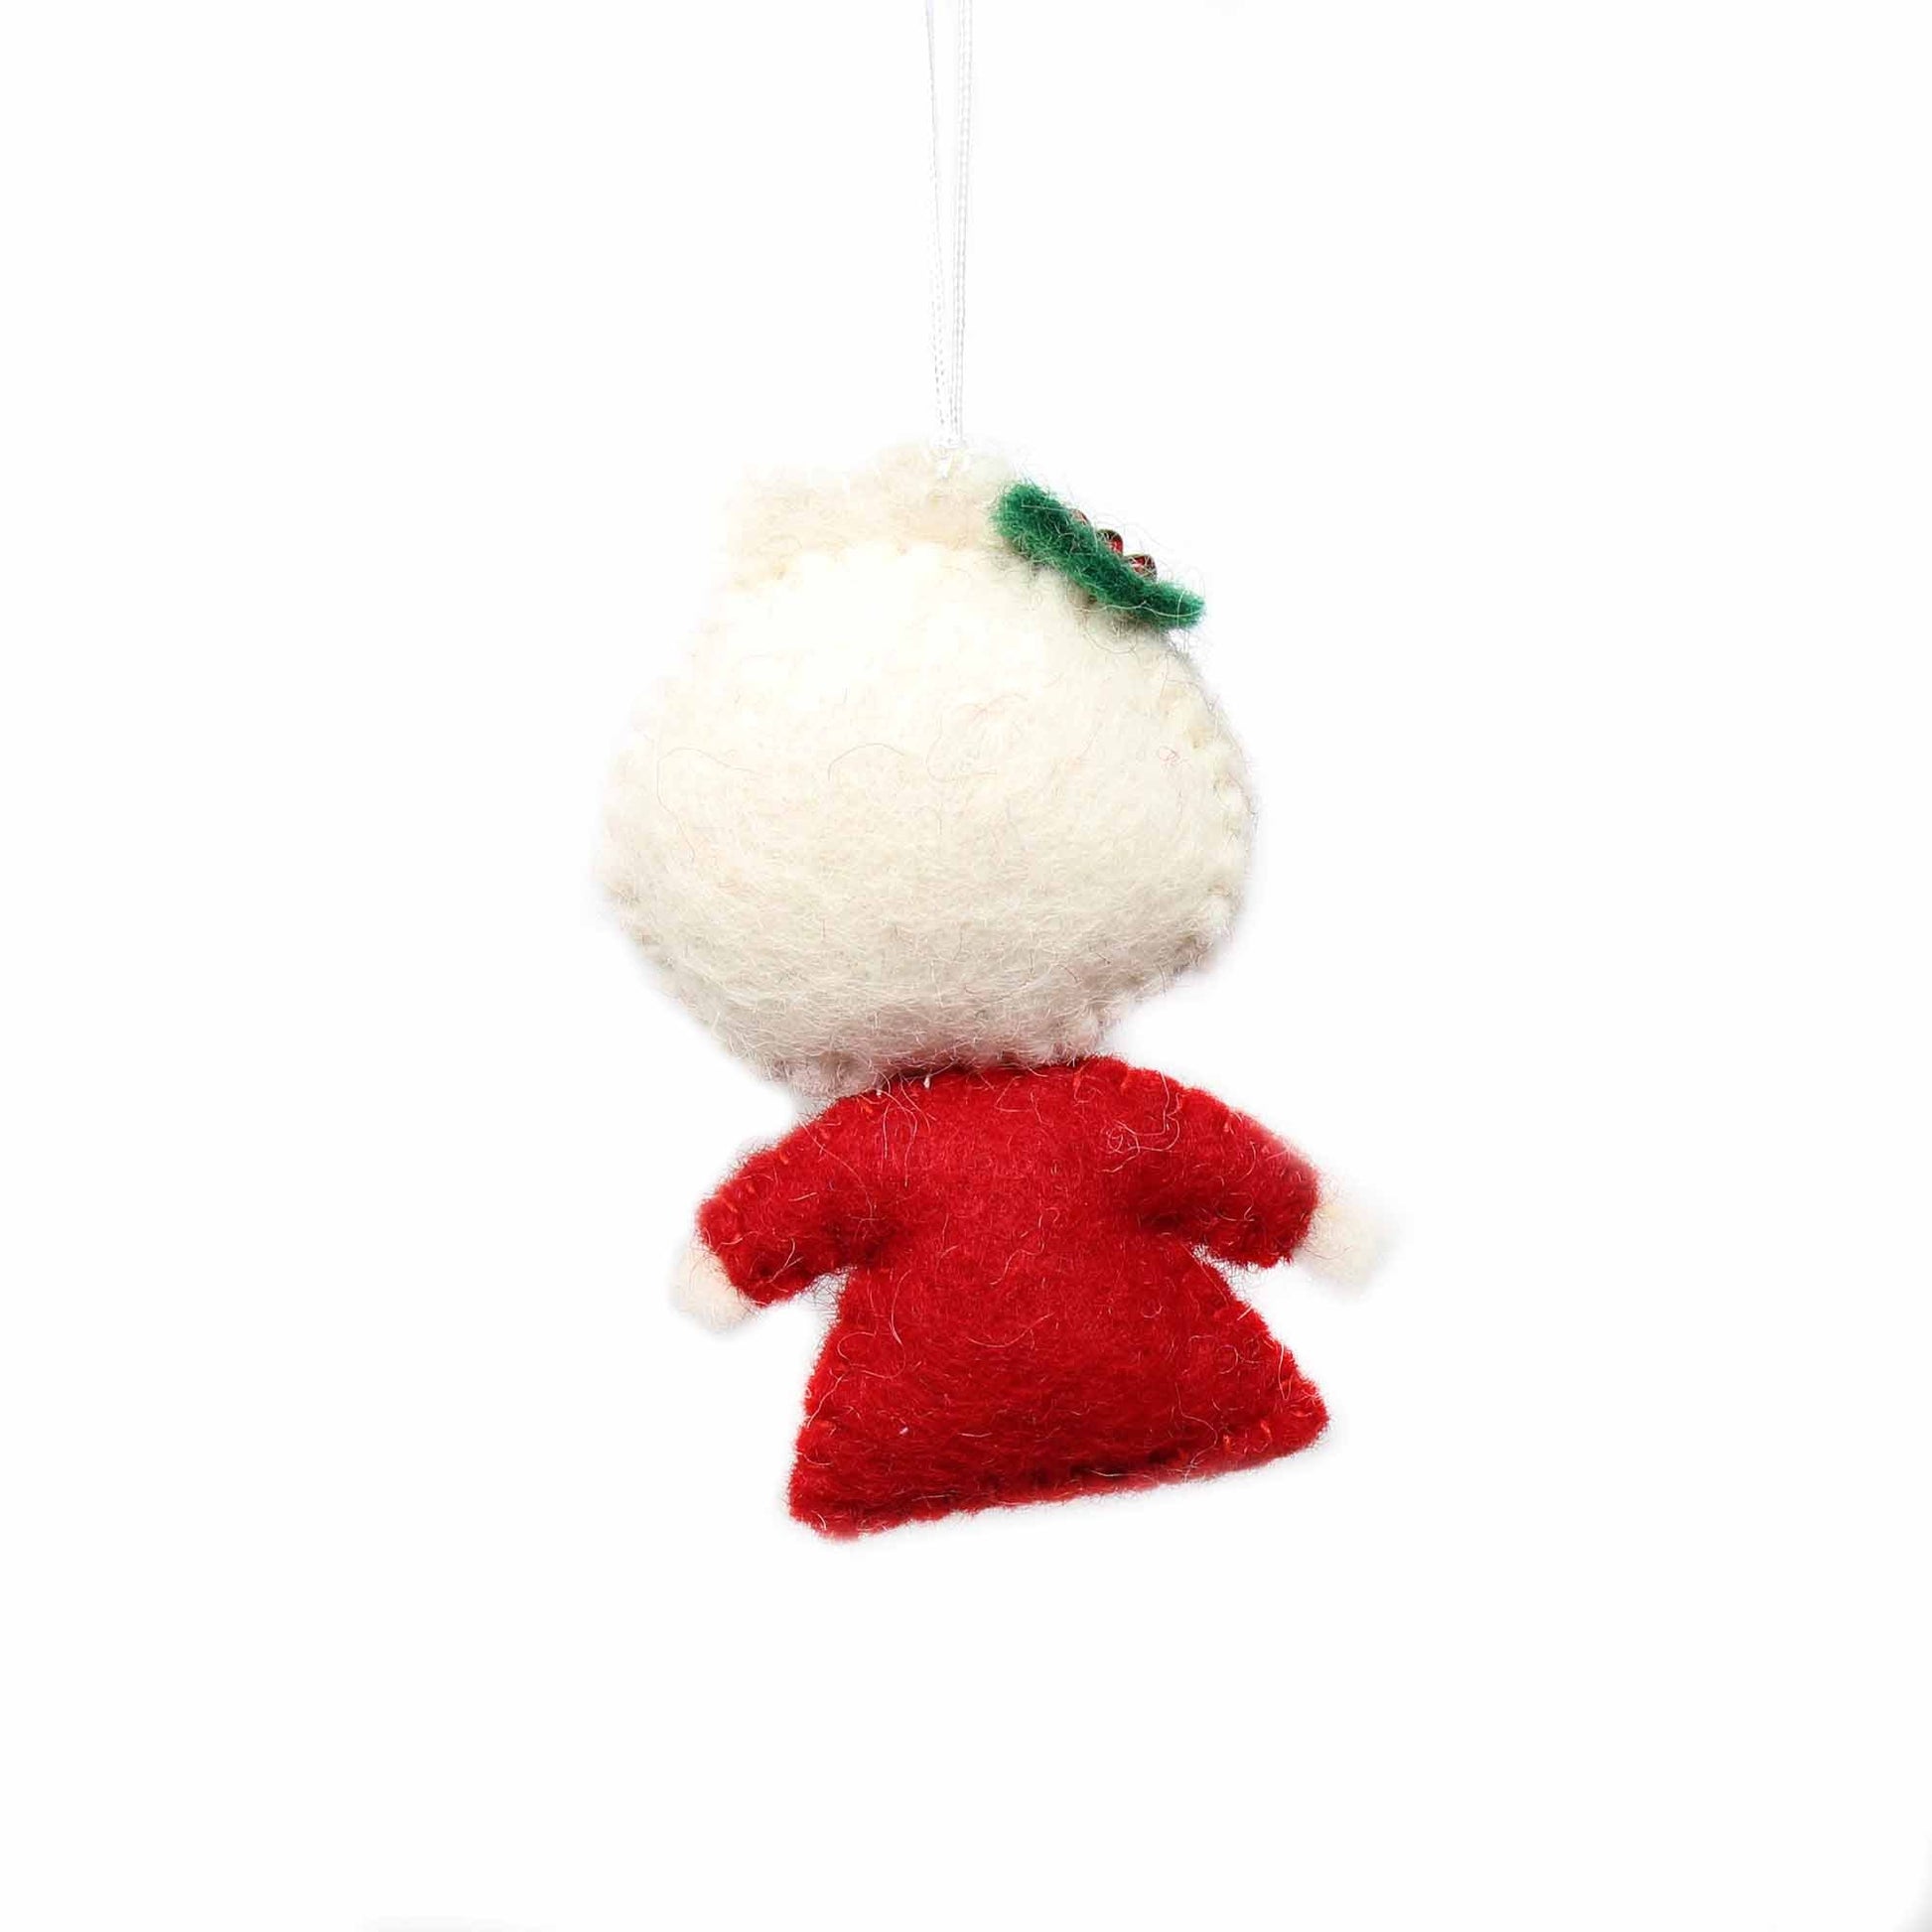 Hand Felted Christmas Ornament: Mrs. Claus - Global Groove (H) - Linda Kay Gifford’s - Those Nasty Women TALK! by SWEETSurvivor